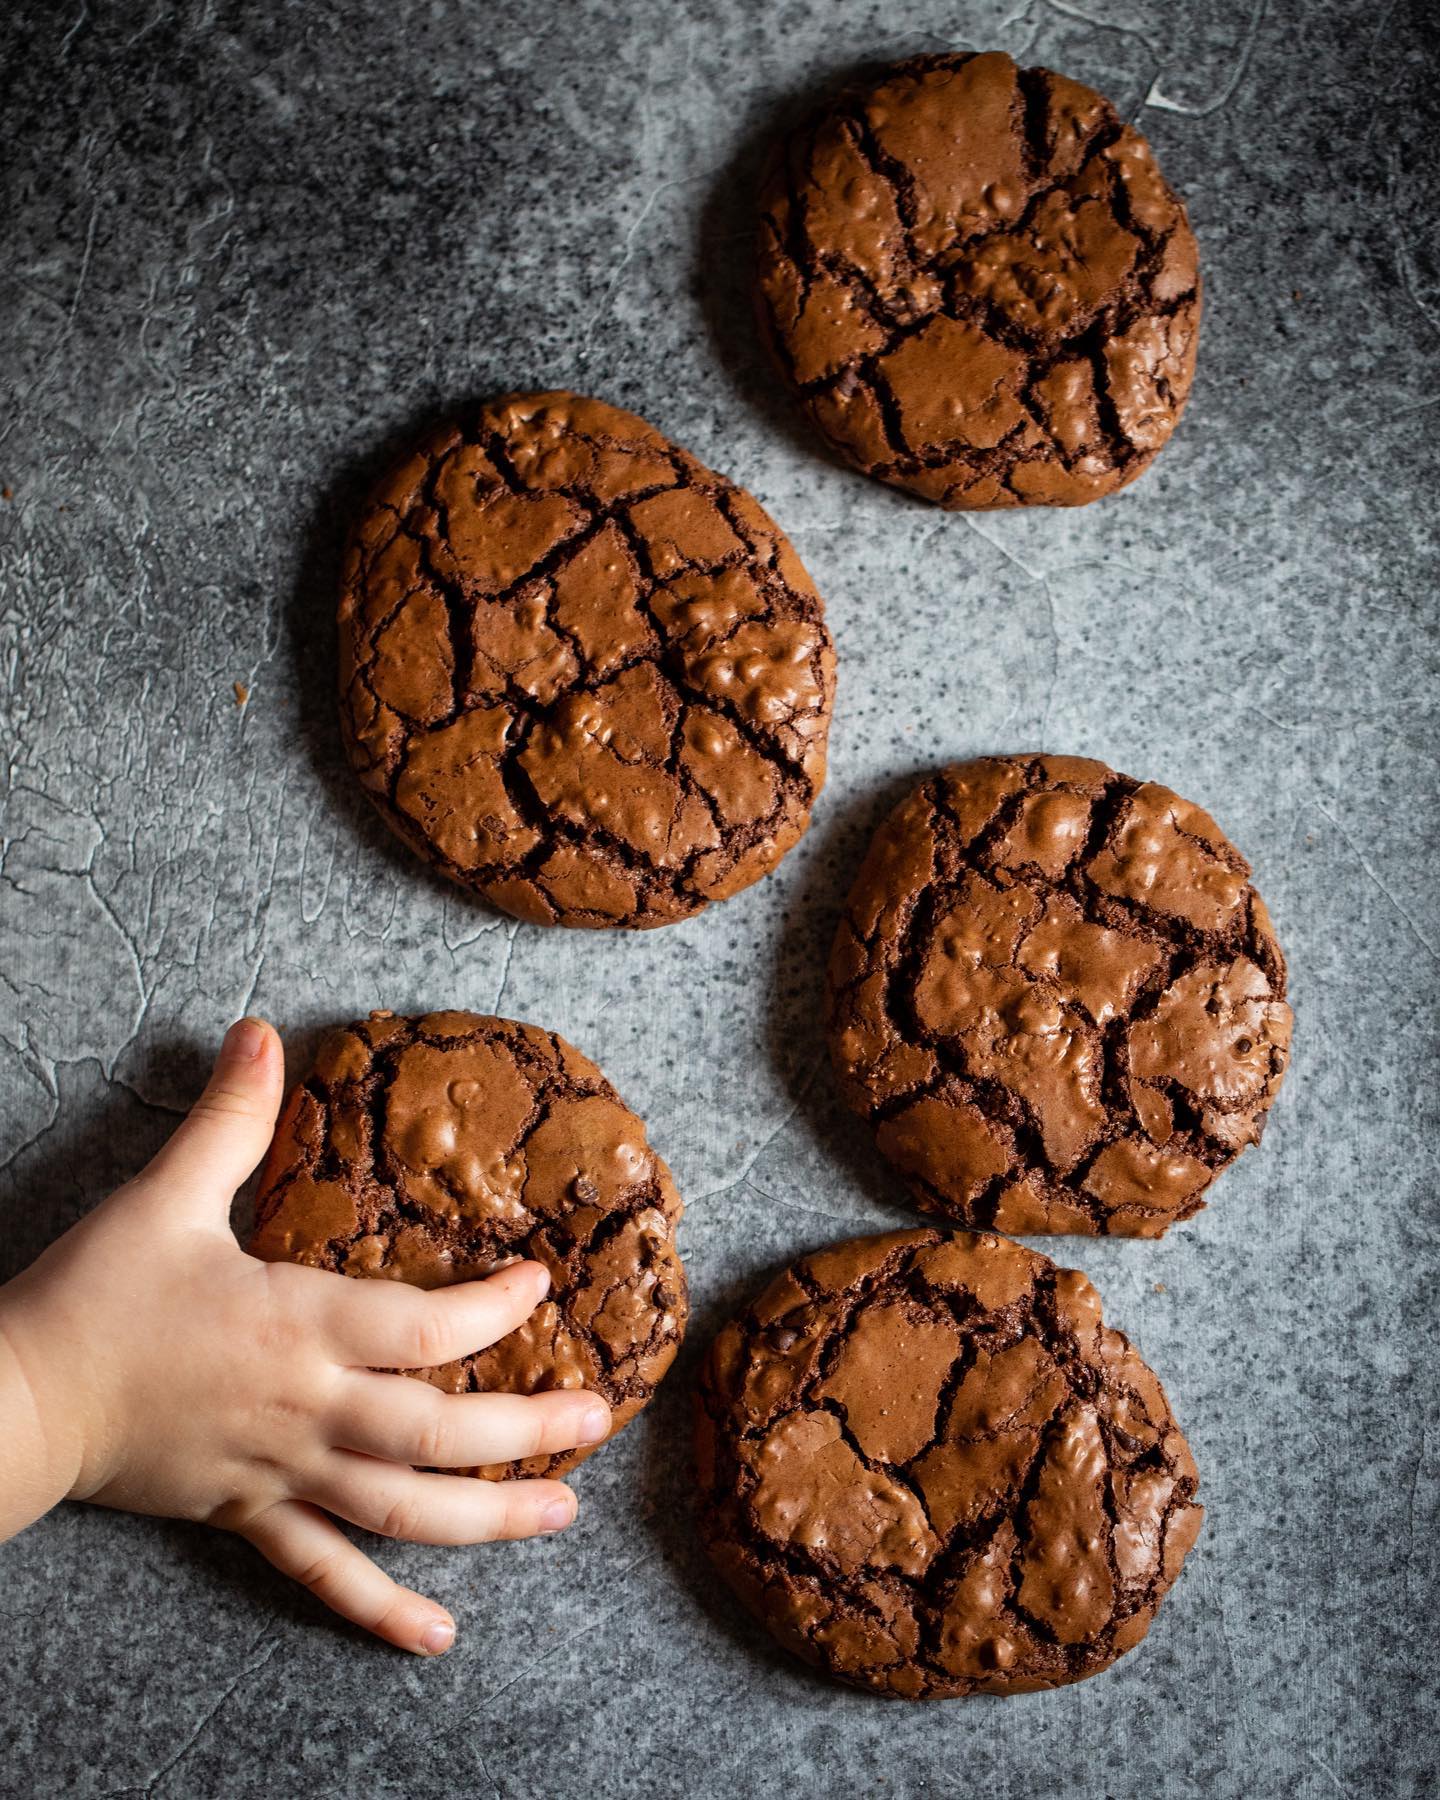 Extremely chocolate cookies